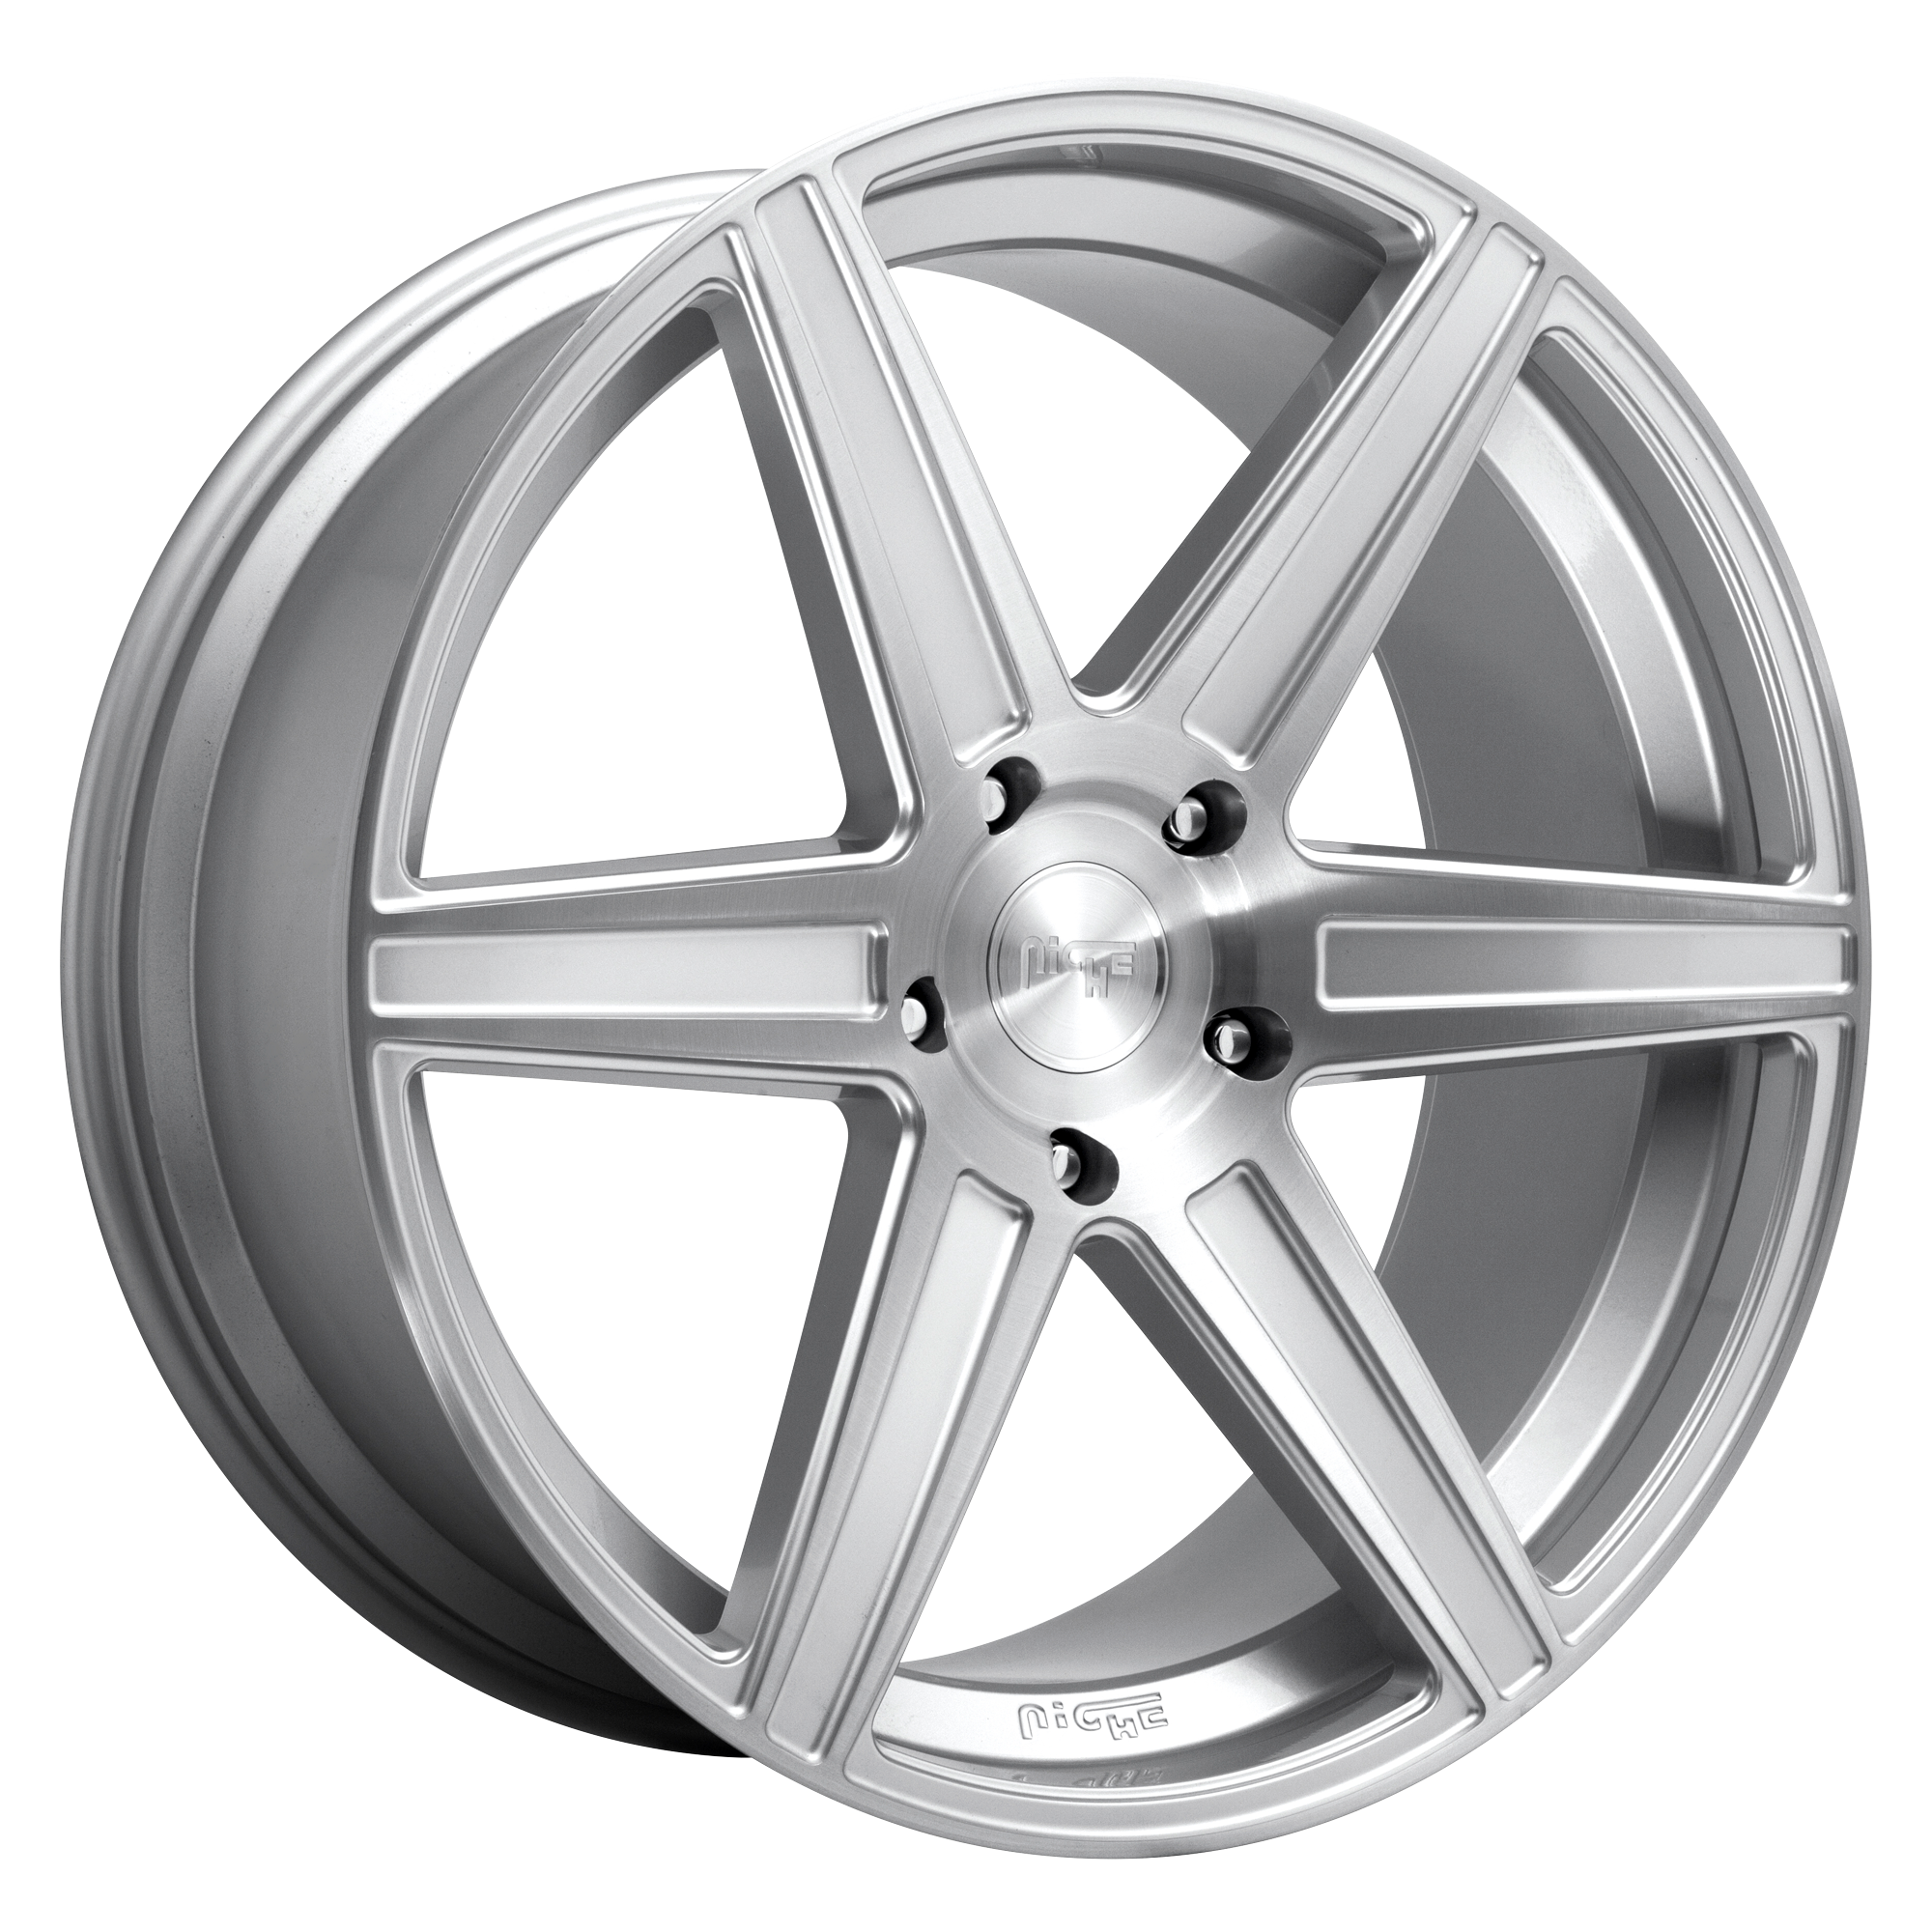 CARINA 22x9.5 6x139.70 GLOSS SILVER BRUSHED (30 mm) - Tires and Engine Performance